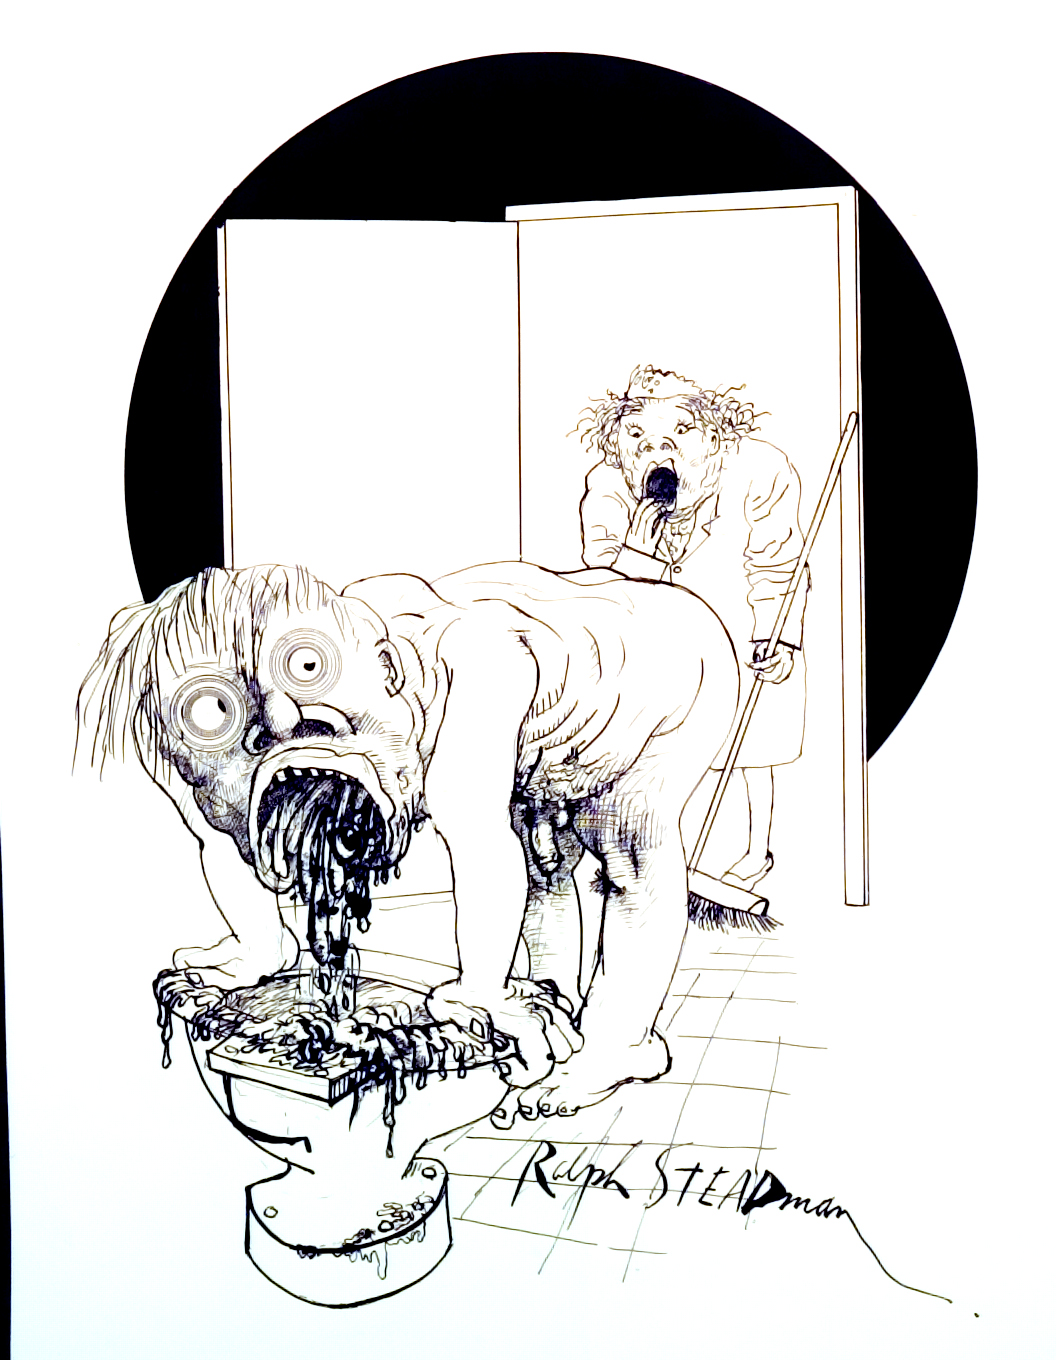 Illustration by Ralph Steadman from Fear and loathing in Las Vegas, the novel by Hunter S Thompson.